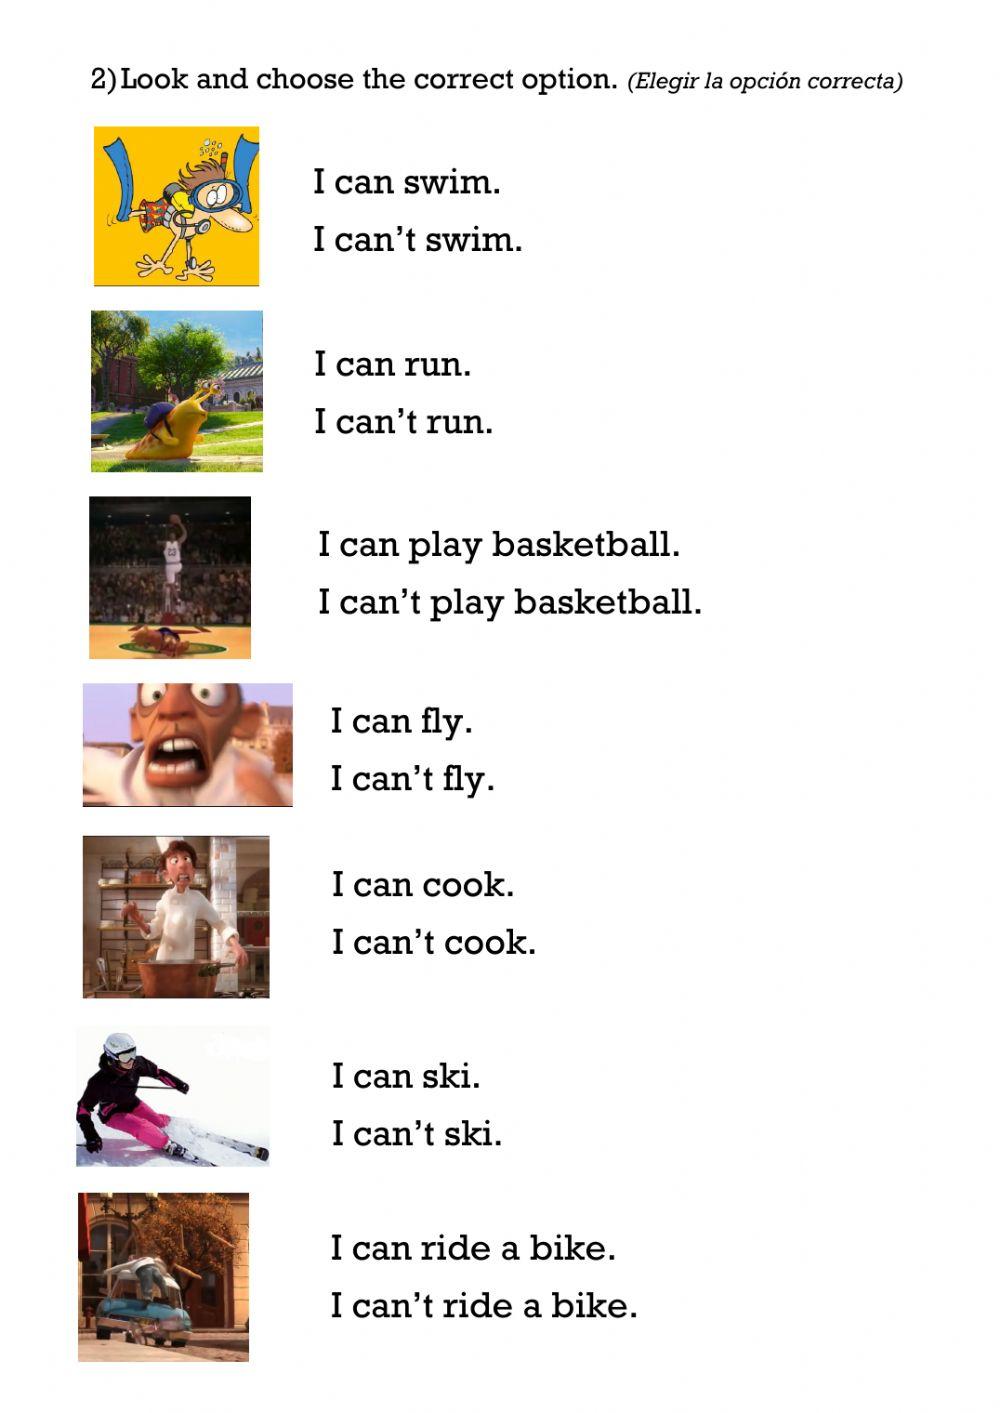 Sports and activities